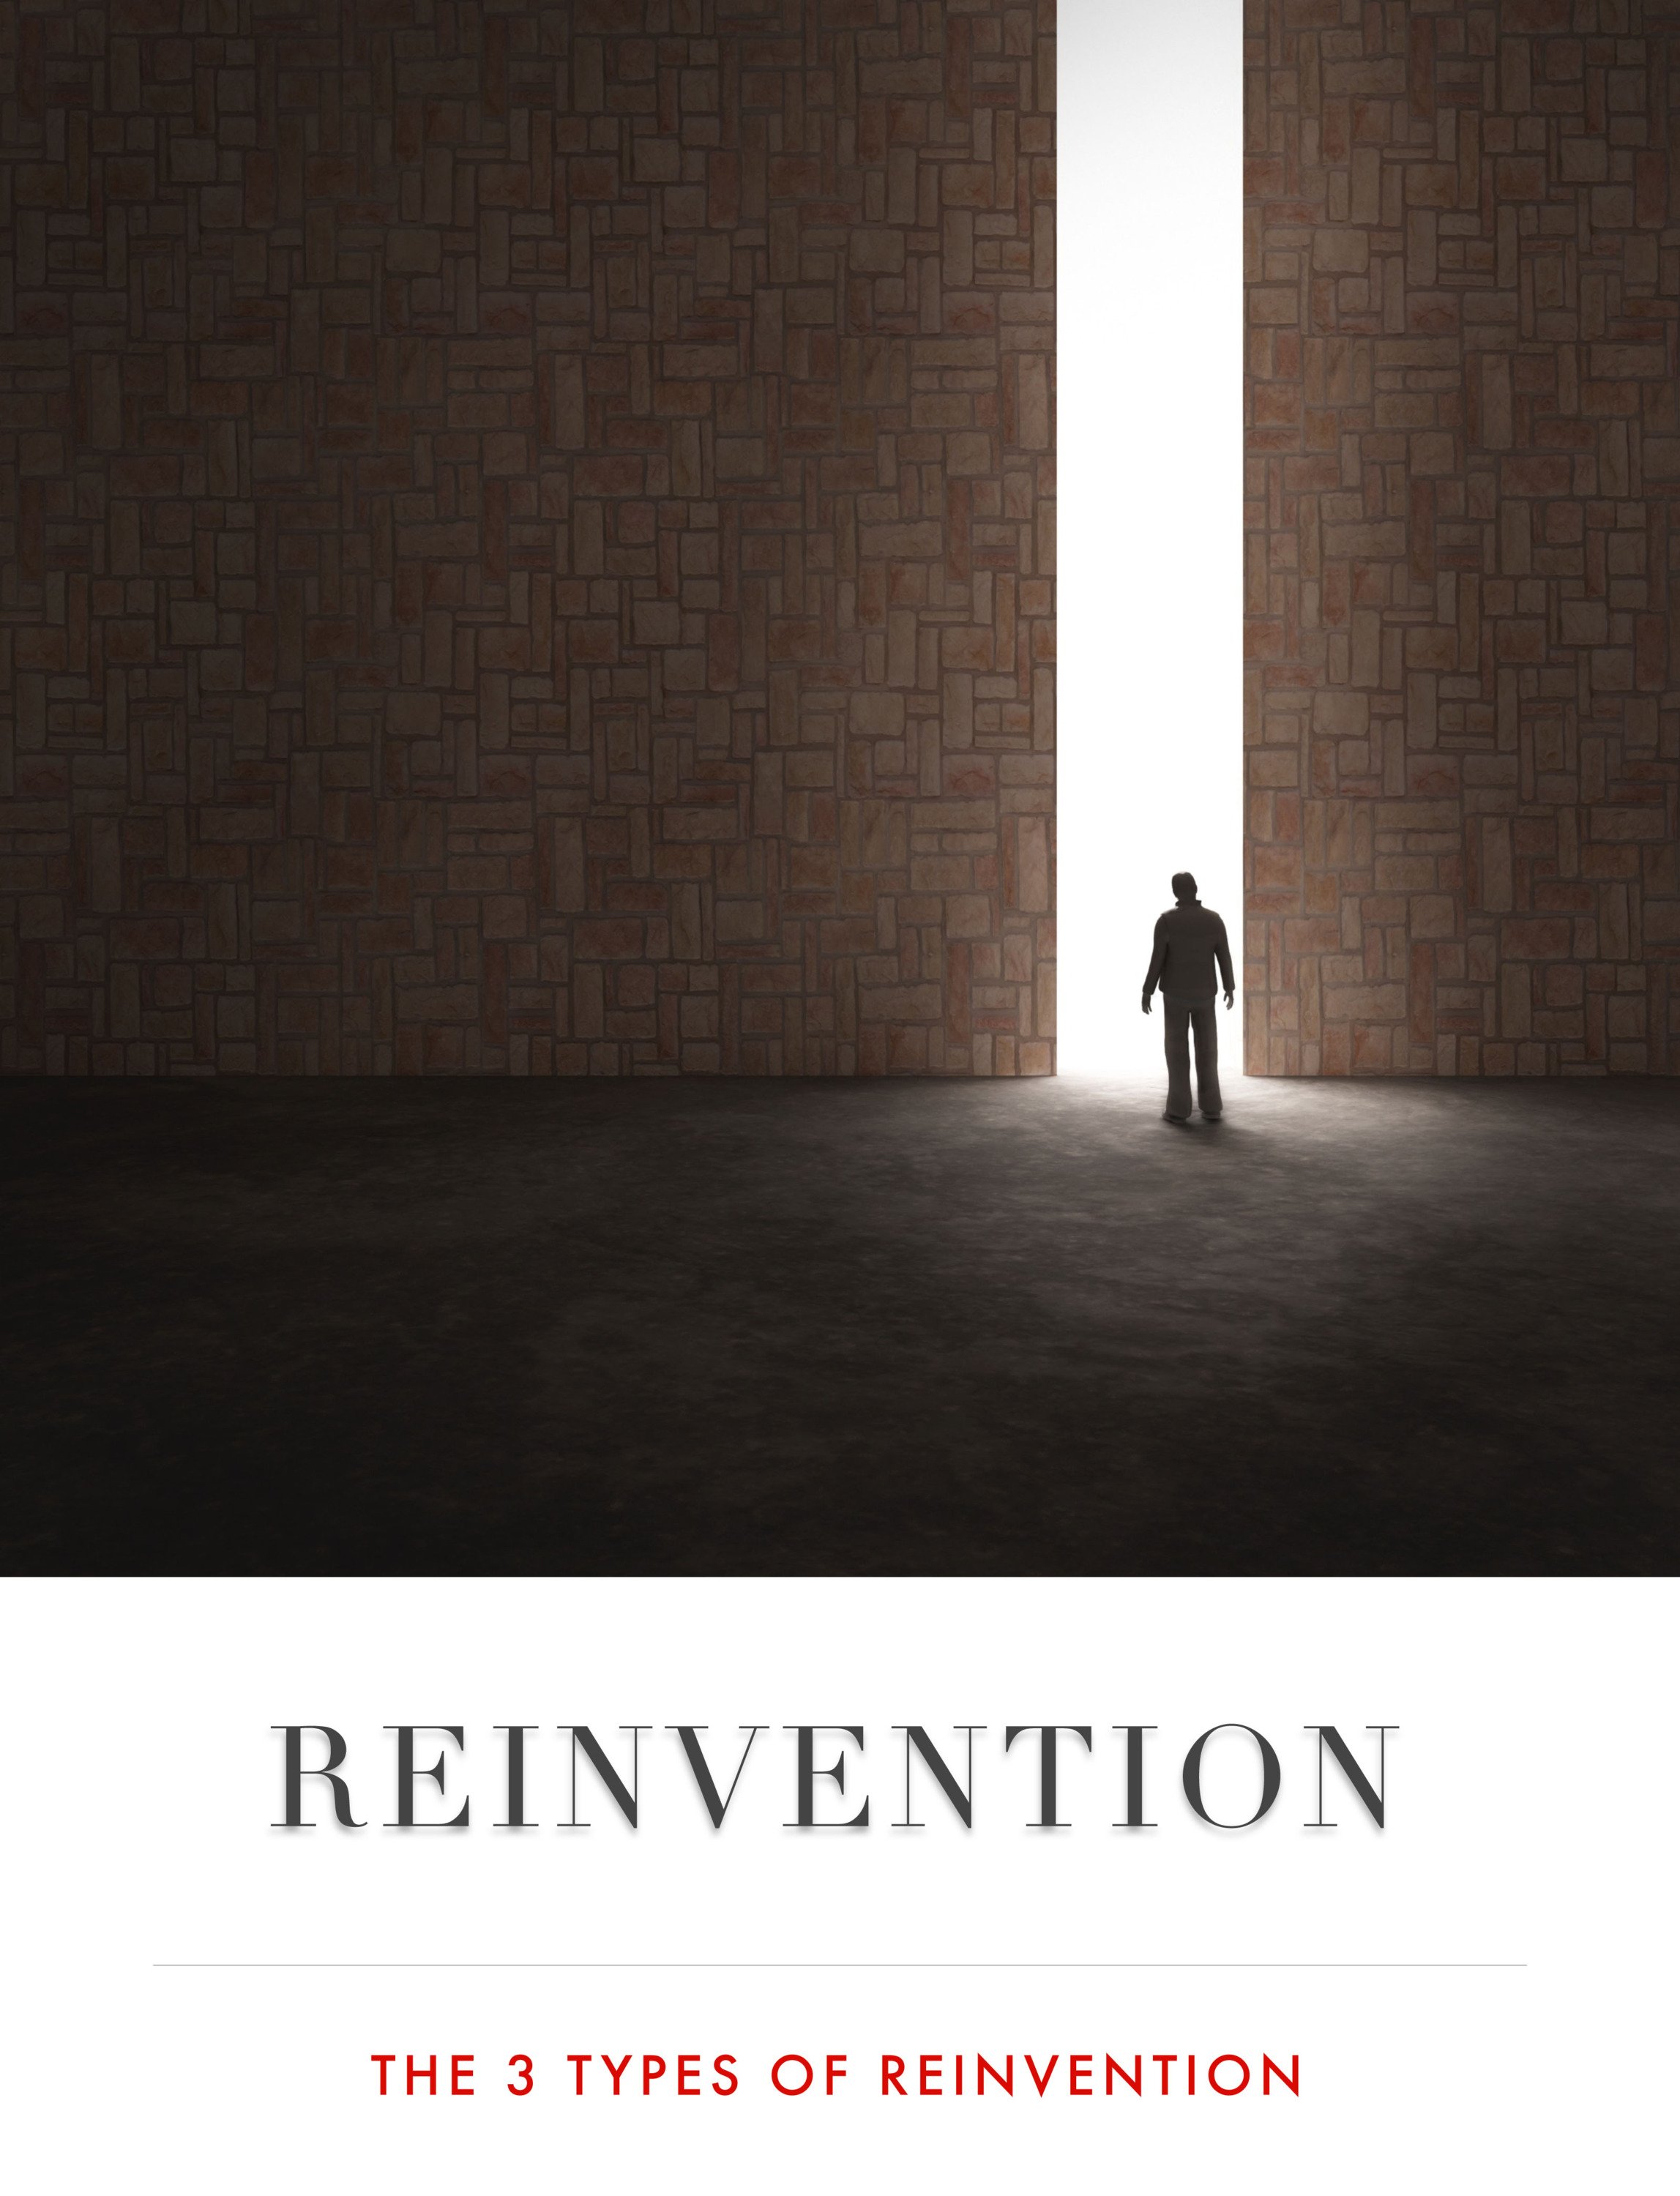 The 3 Types of Reinvention by John Mashni